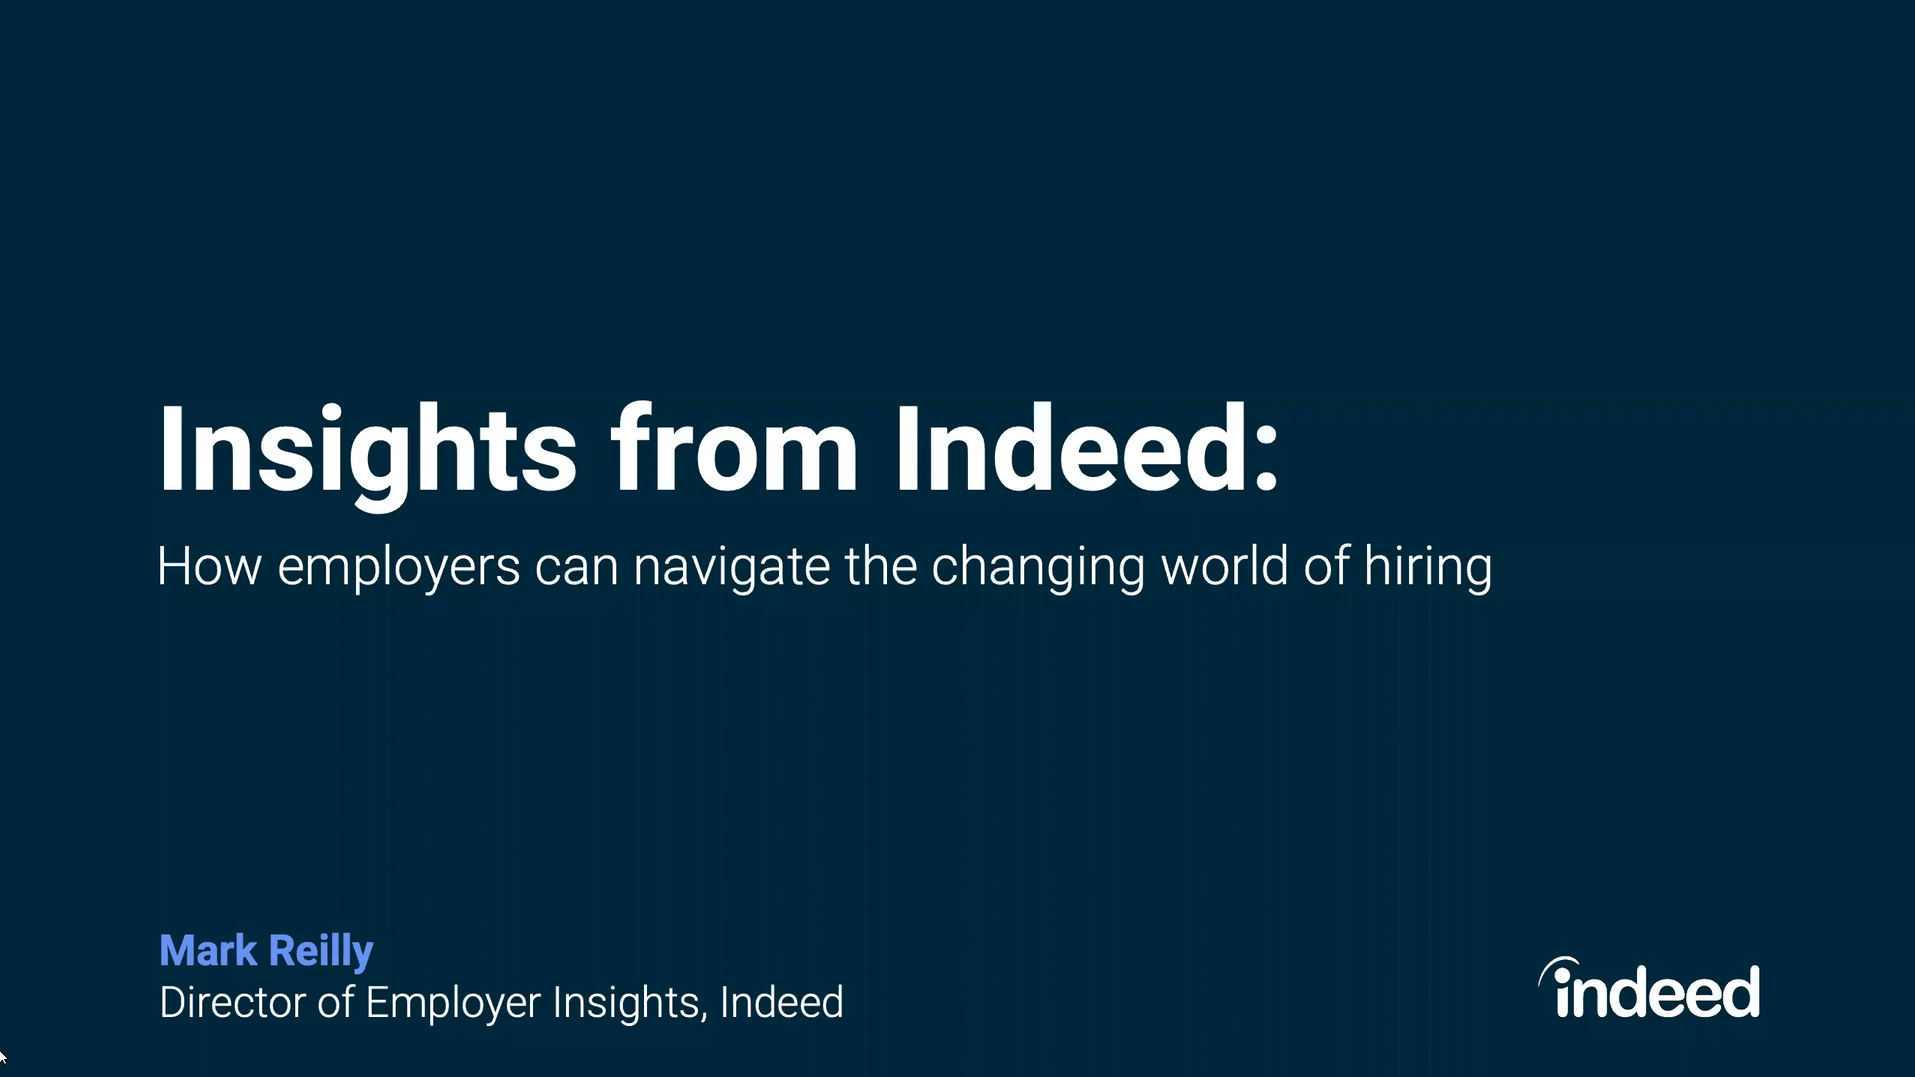 How employers can navigate the changing world of hiring